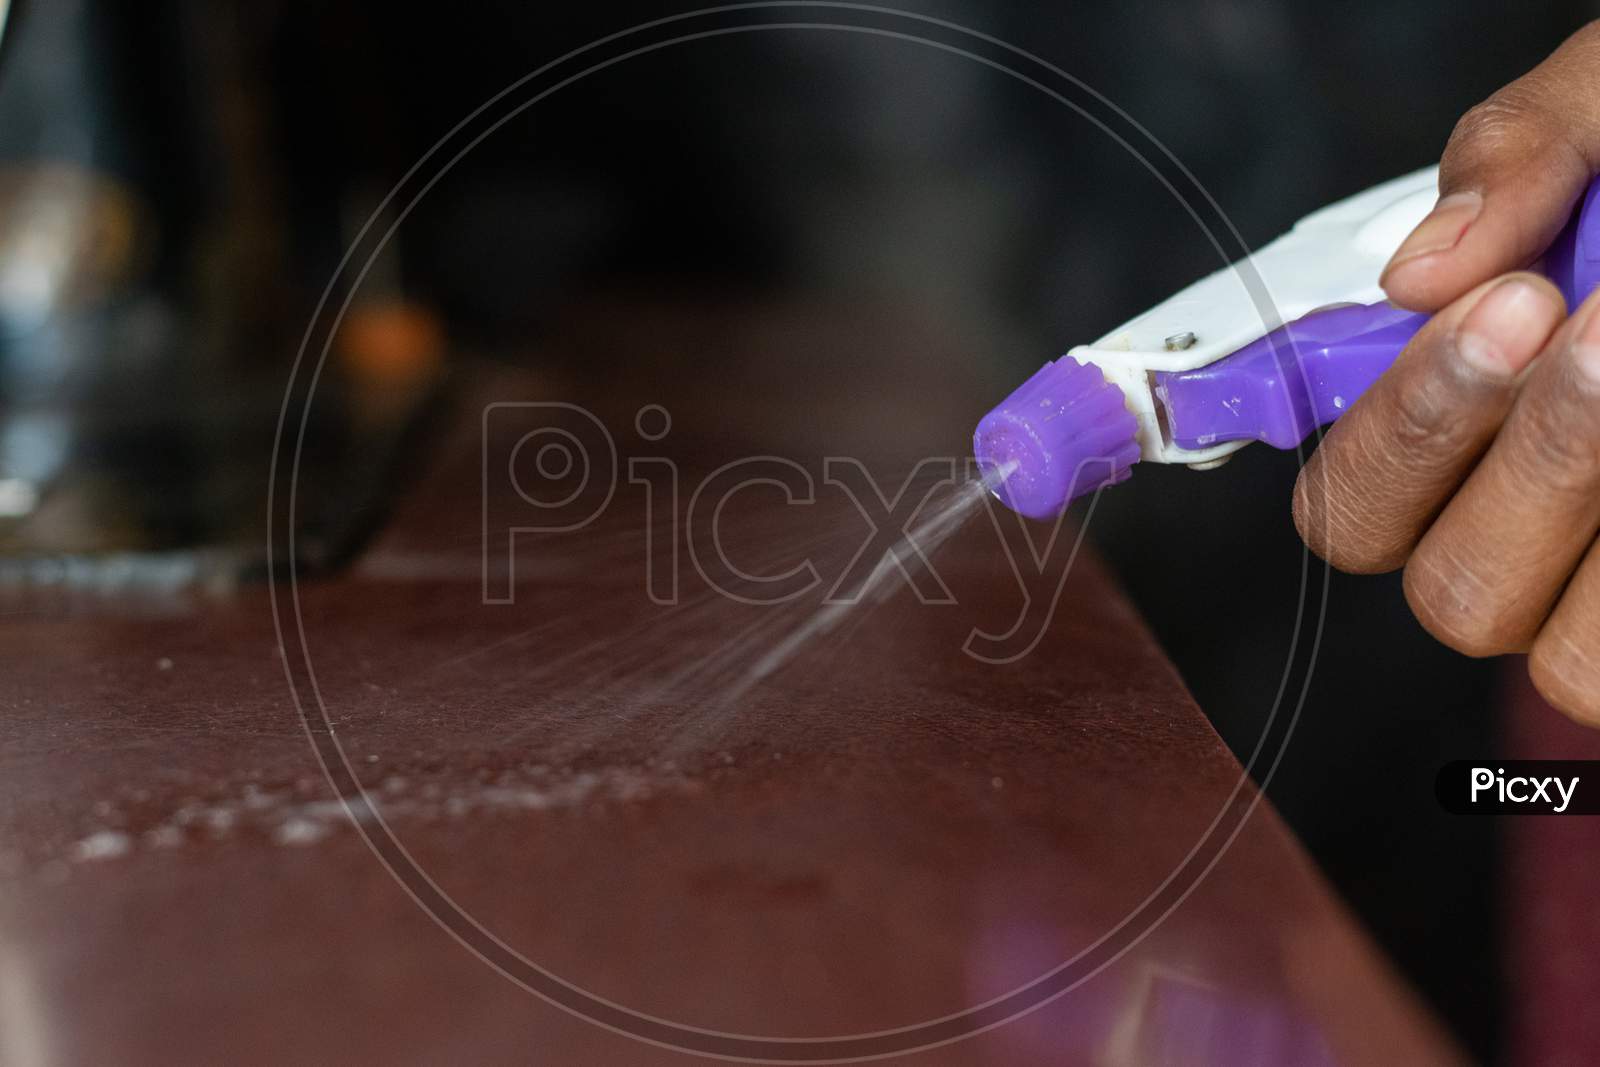 sanitizer is being sprayed on a surface to avoid the spread of corona virus covid 19